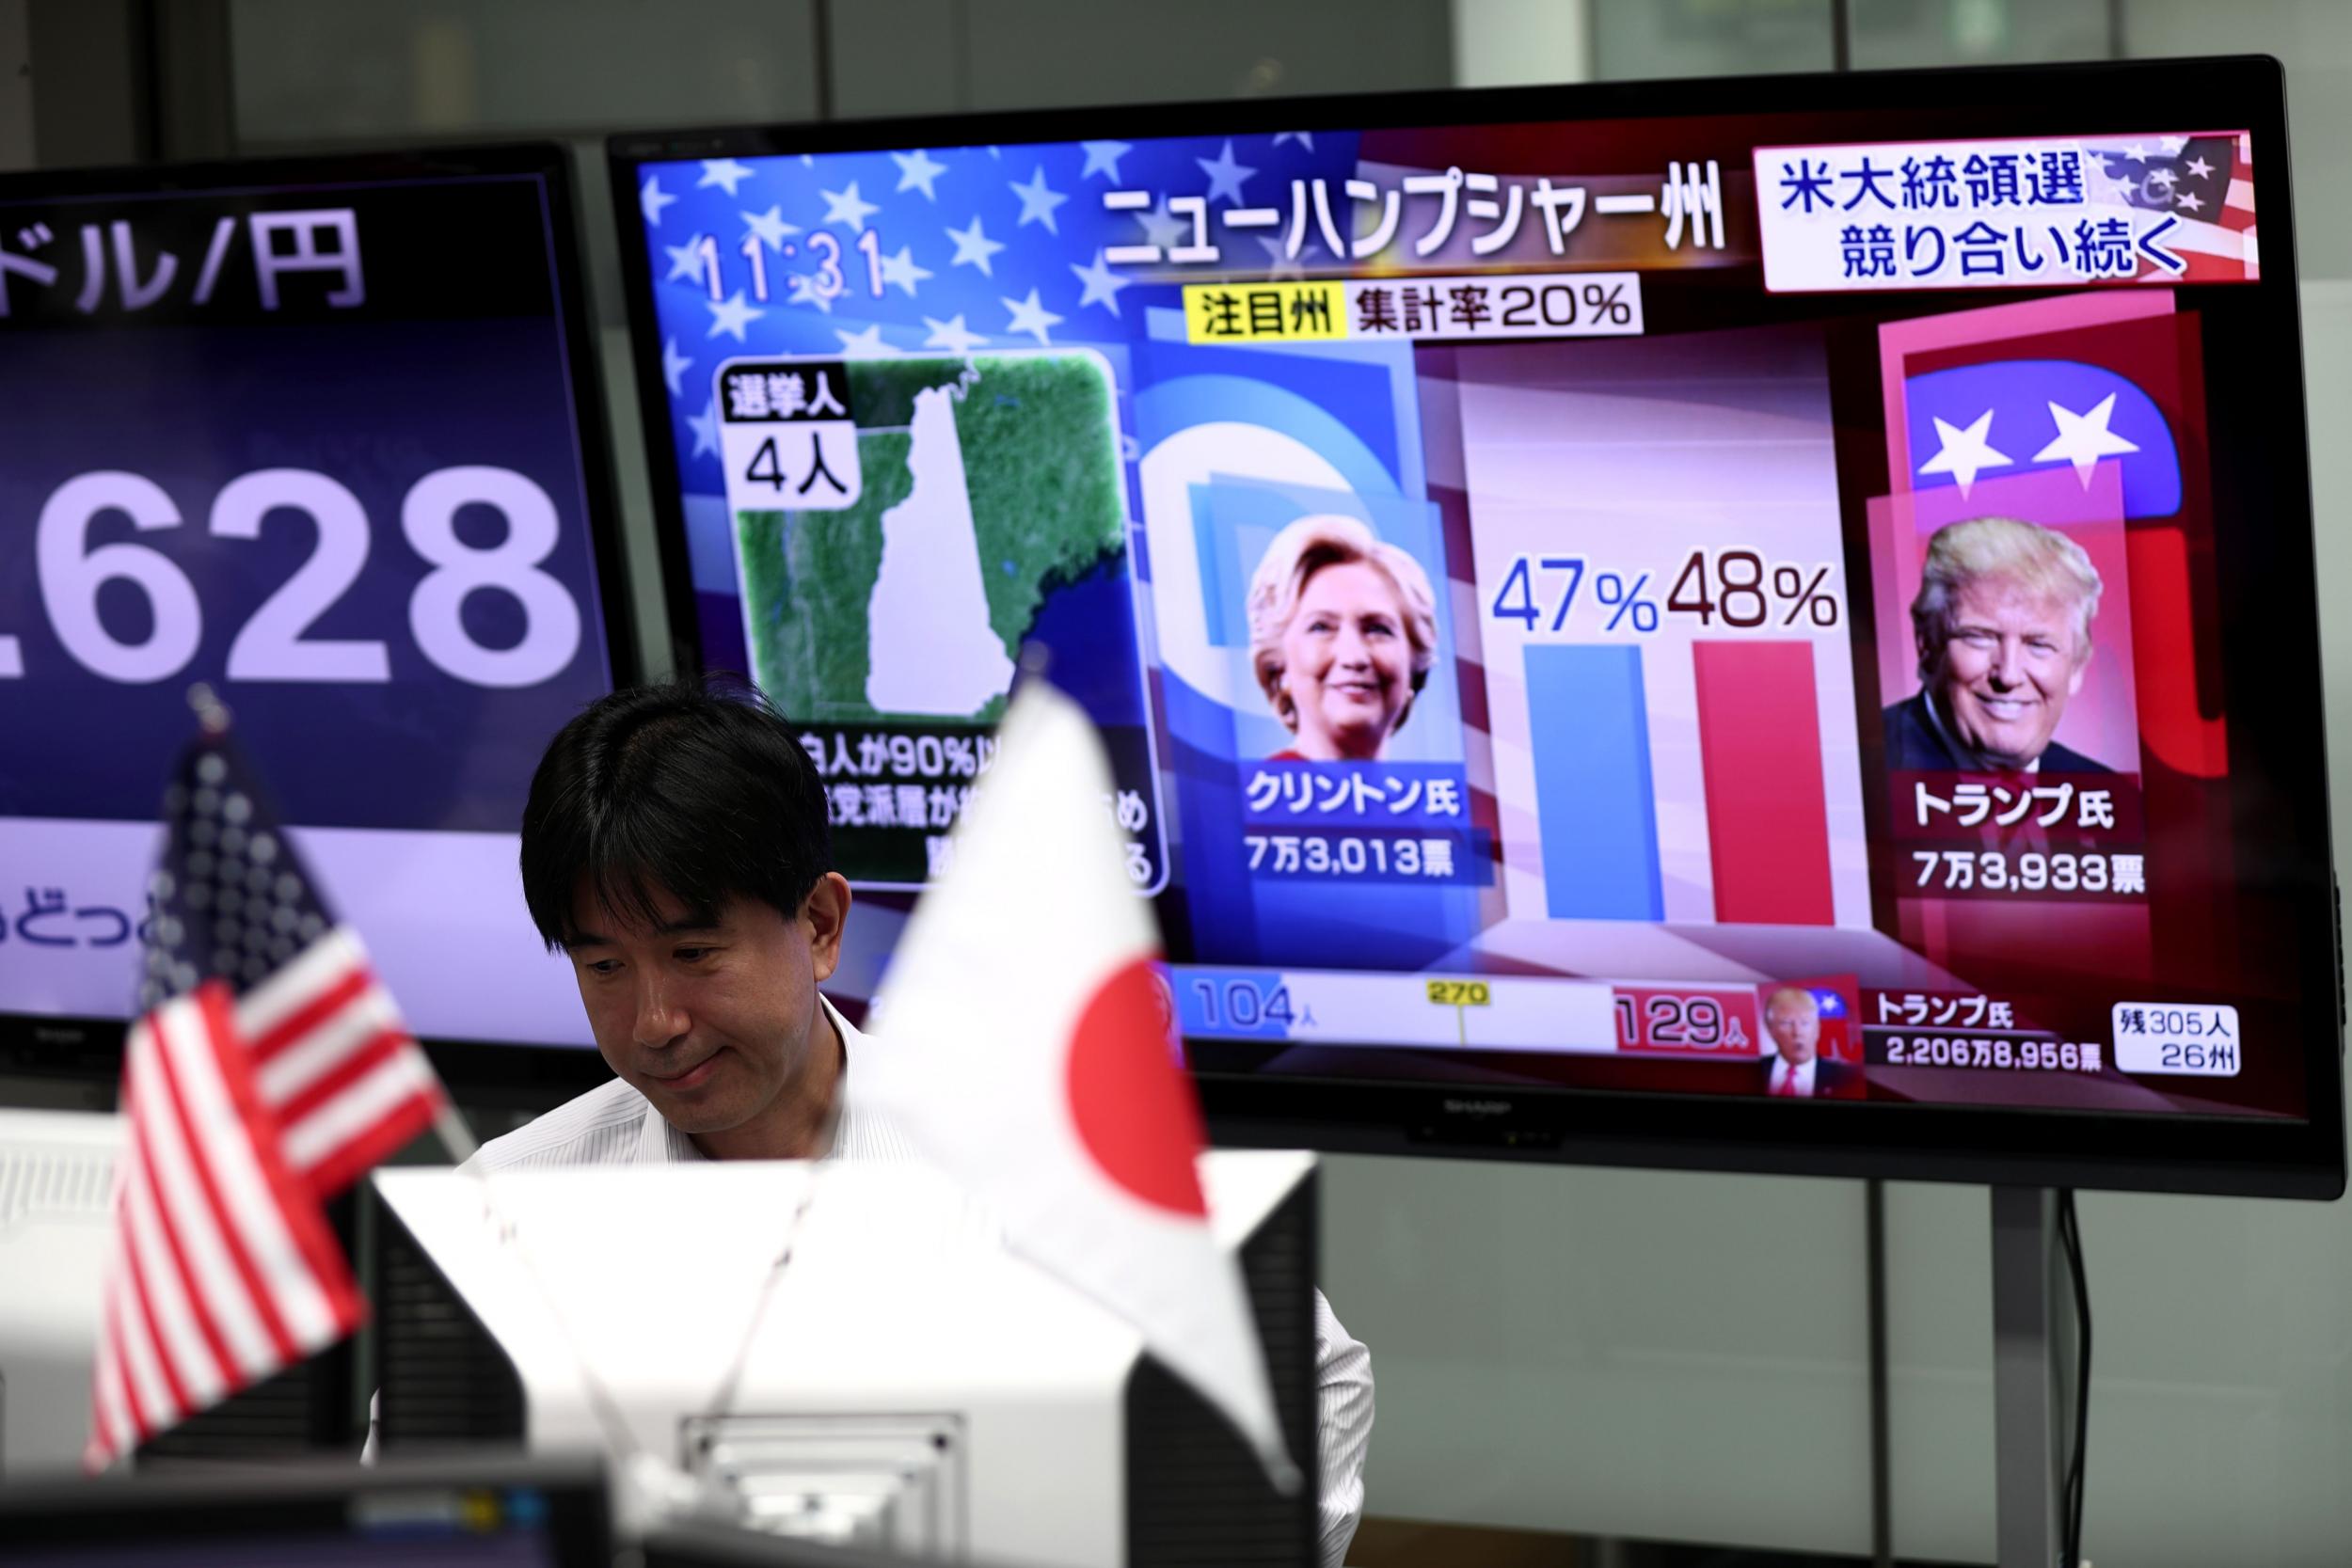 A Japanese employee looks at monitors to observe the US presidential elections